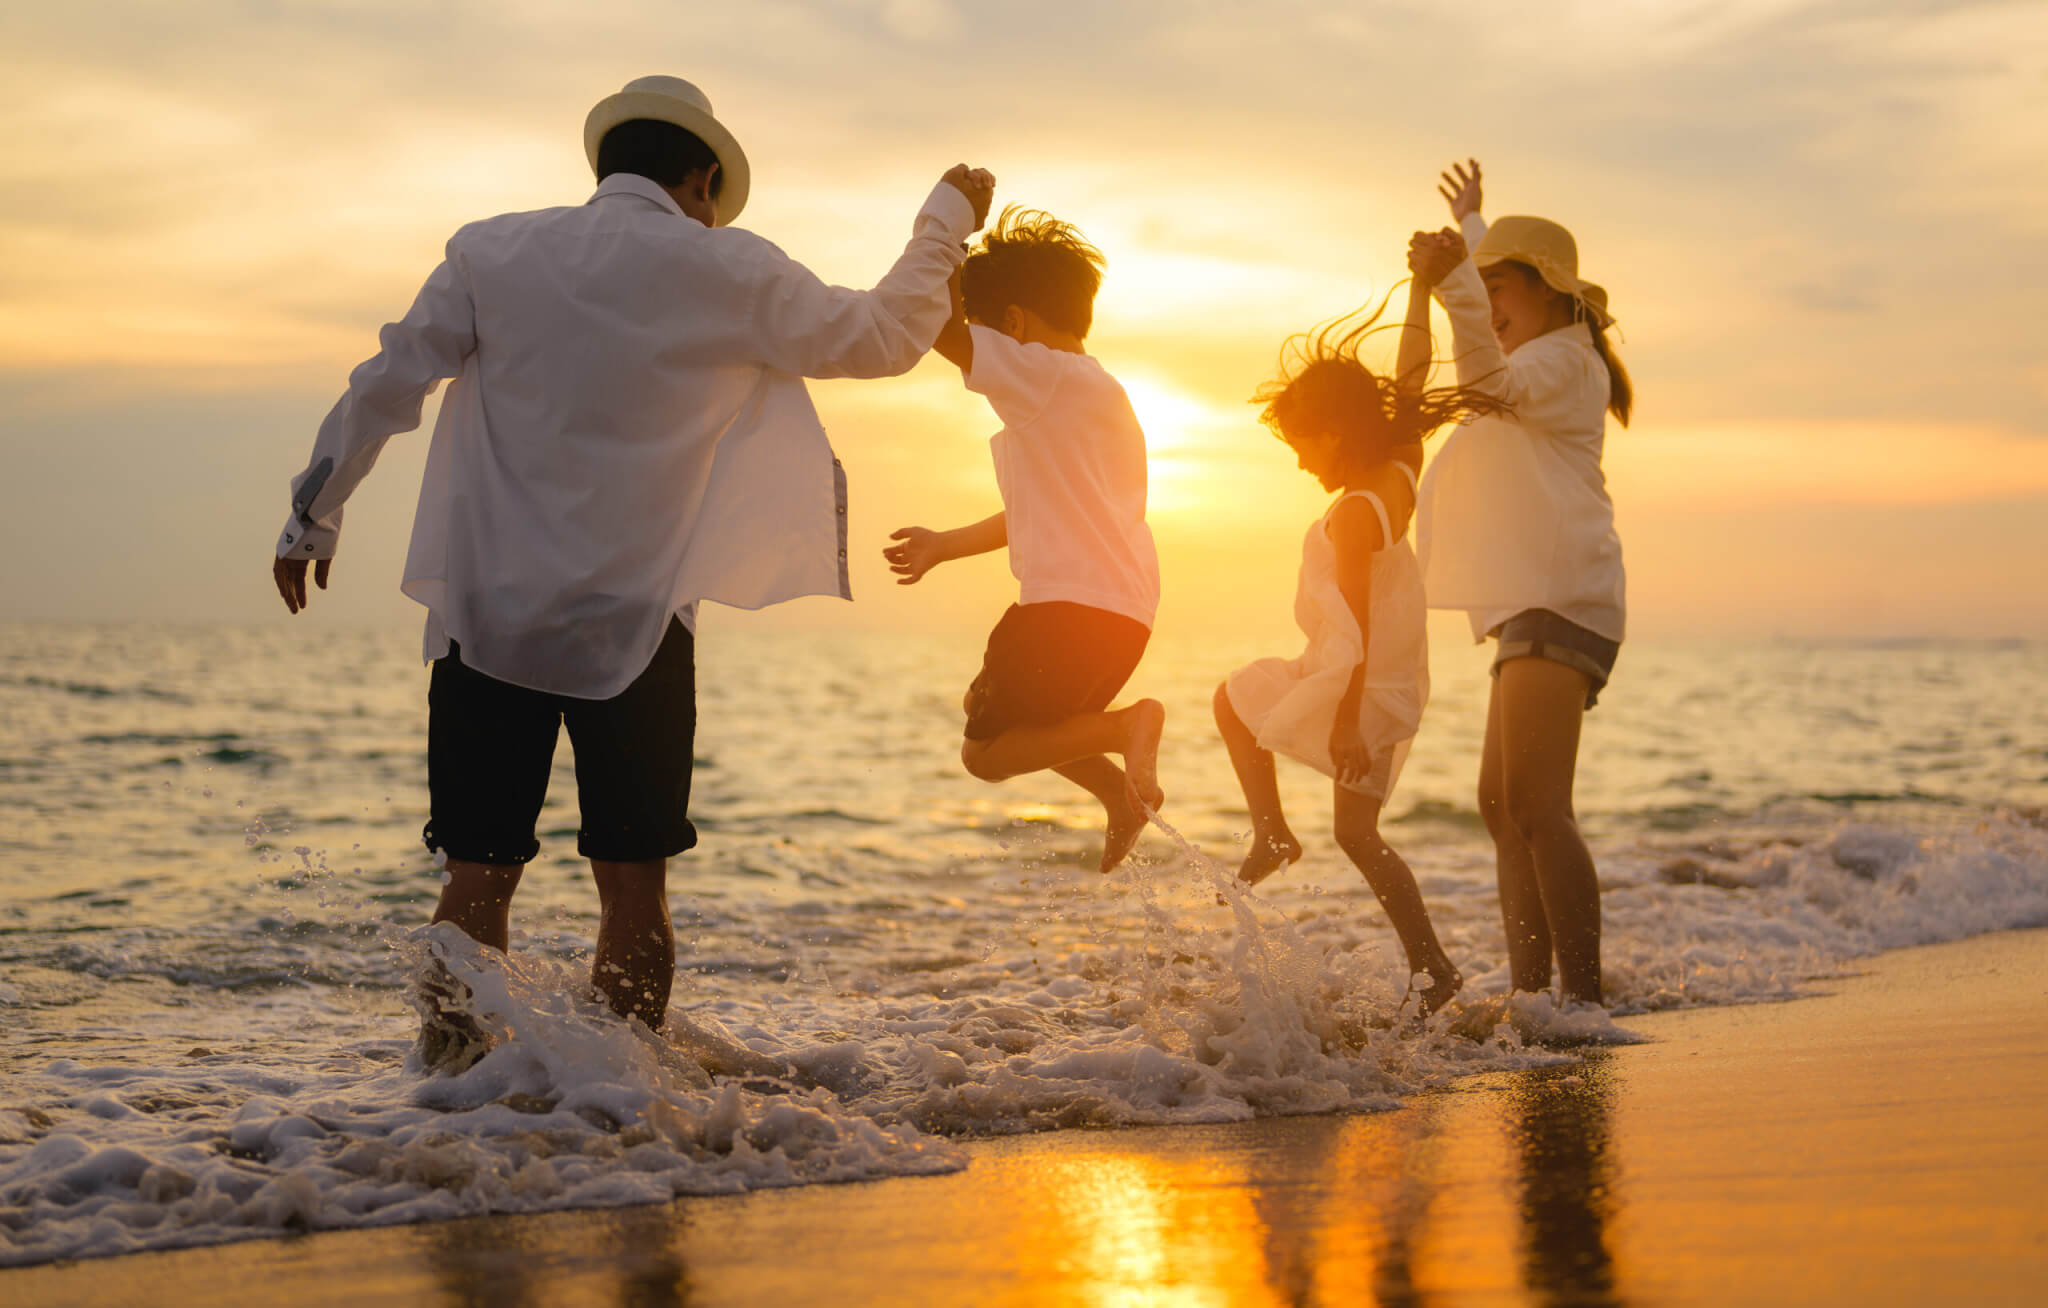 Happy family enjoying together on beach on holiday vacation, Family with beach travel, People enjoying with holiday vacation, High quality photo